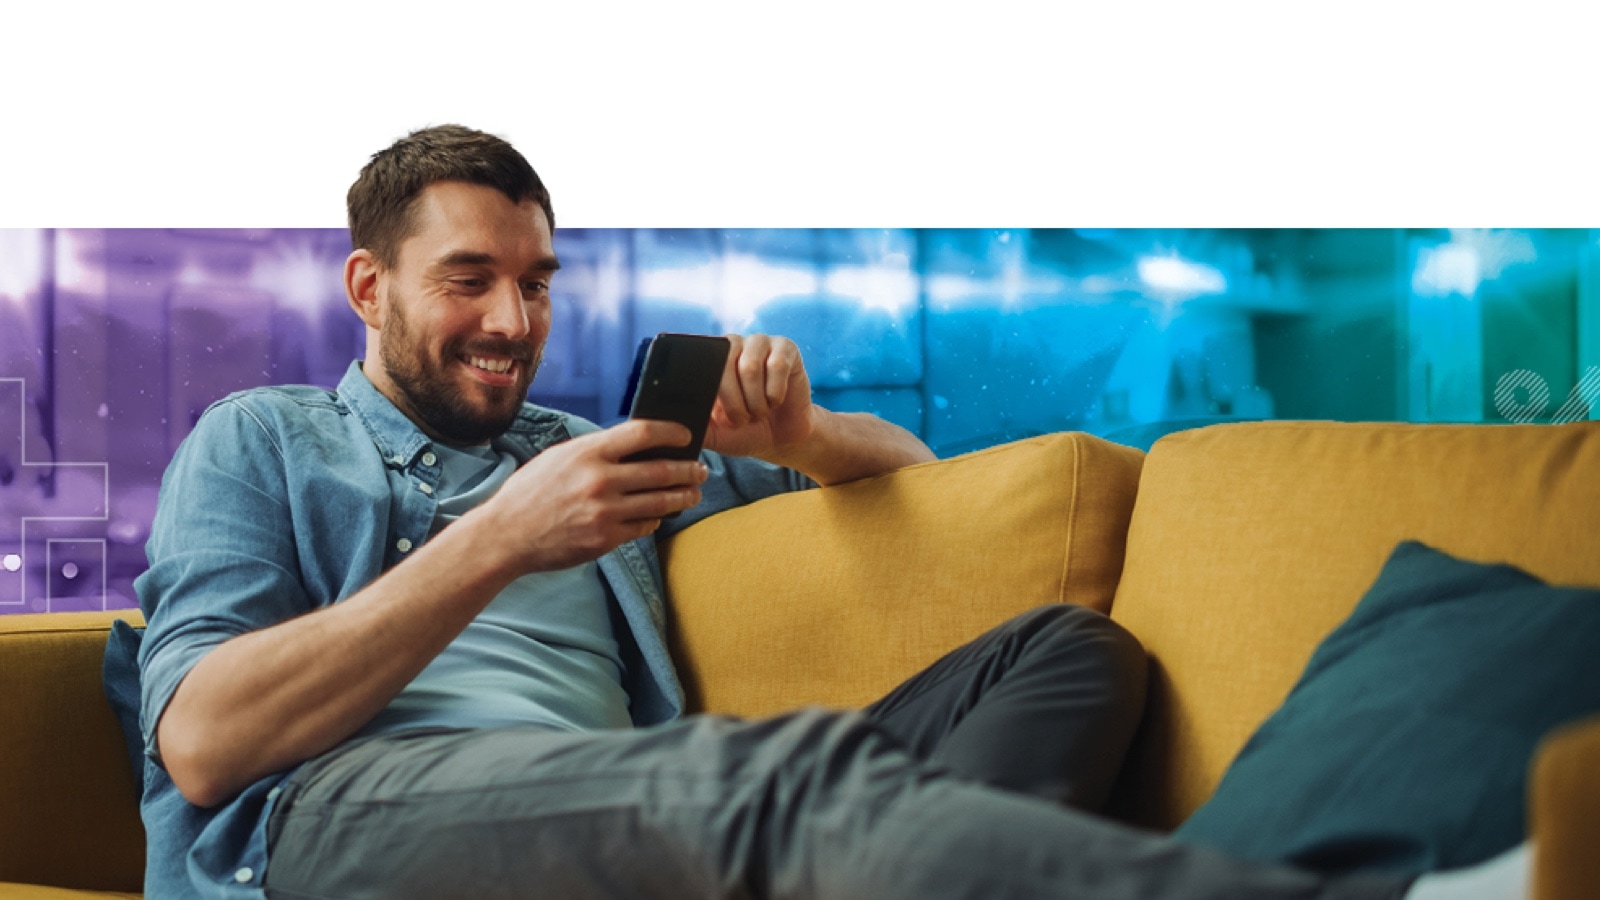 Man sitting on a couch using a smartphone